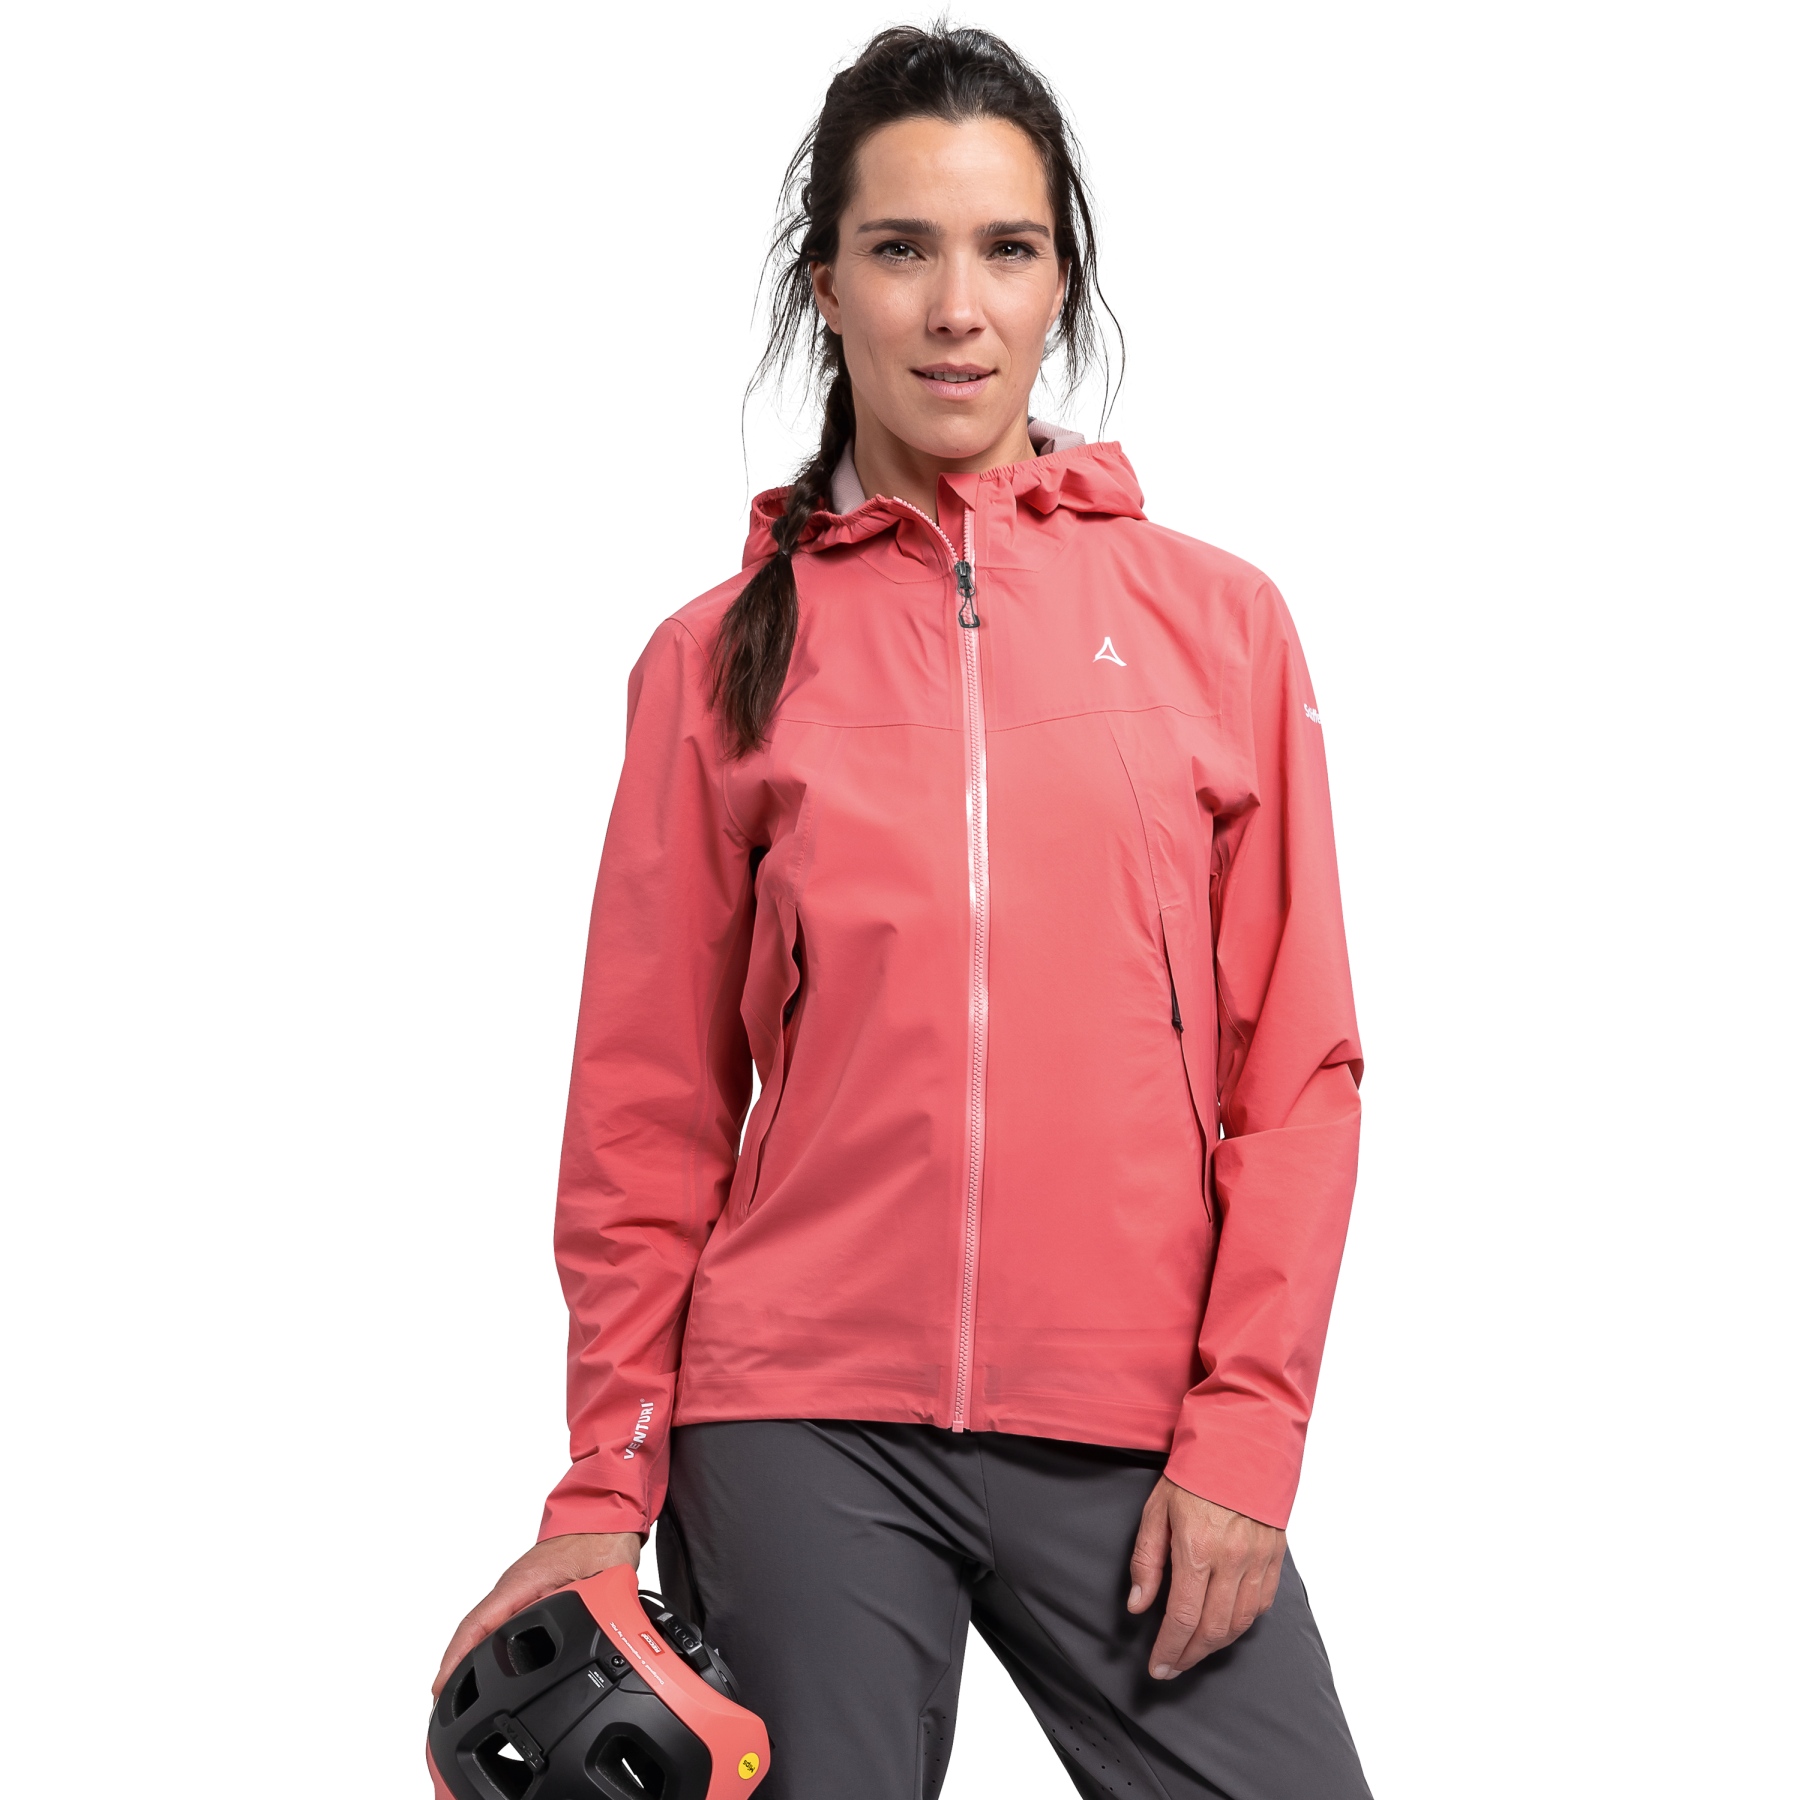 Picture of Schöffel Karma Trail 2.5L Jacket Women - clasping rose 3245